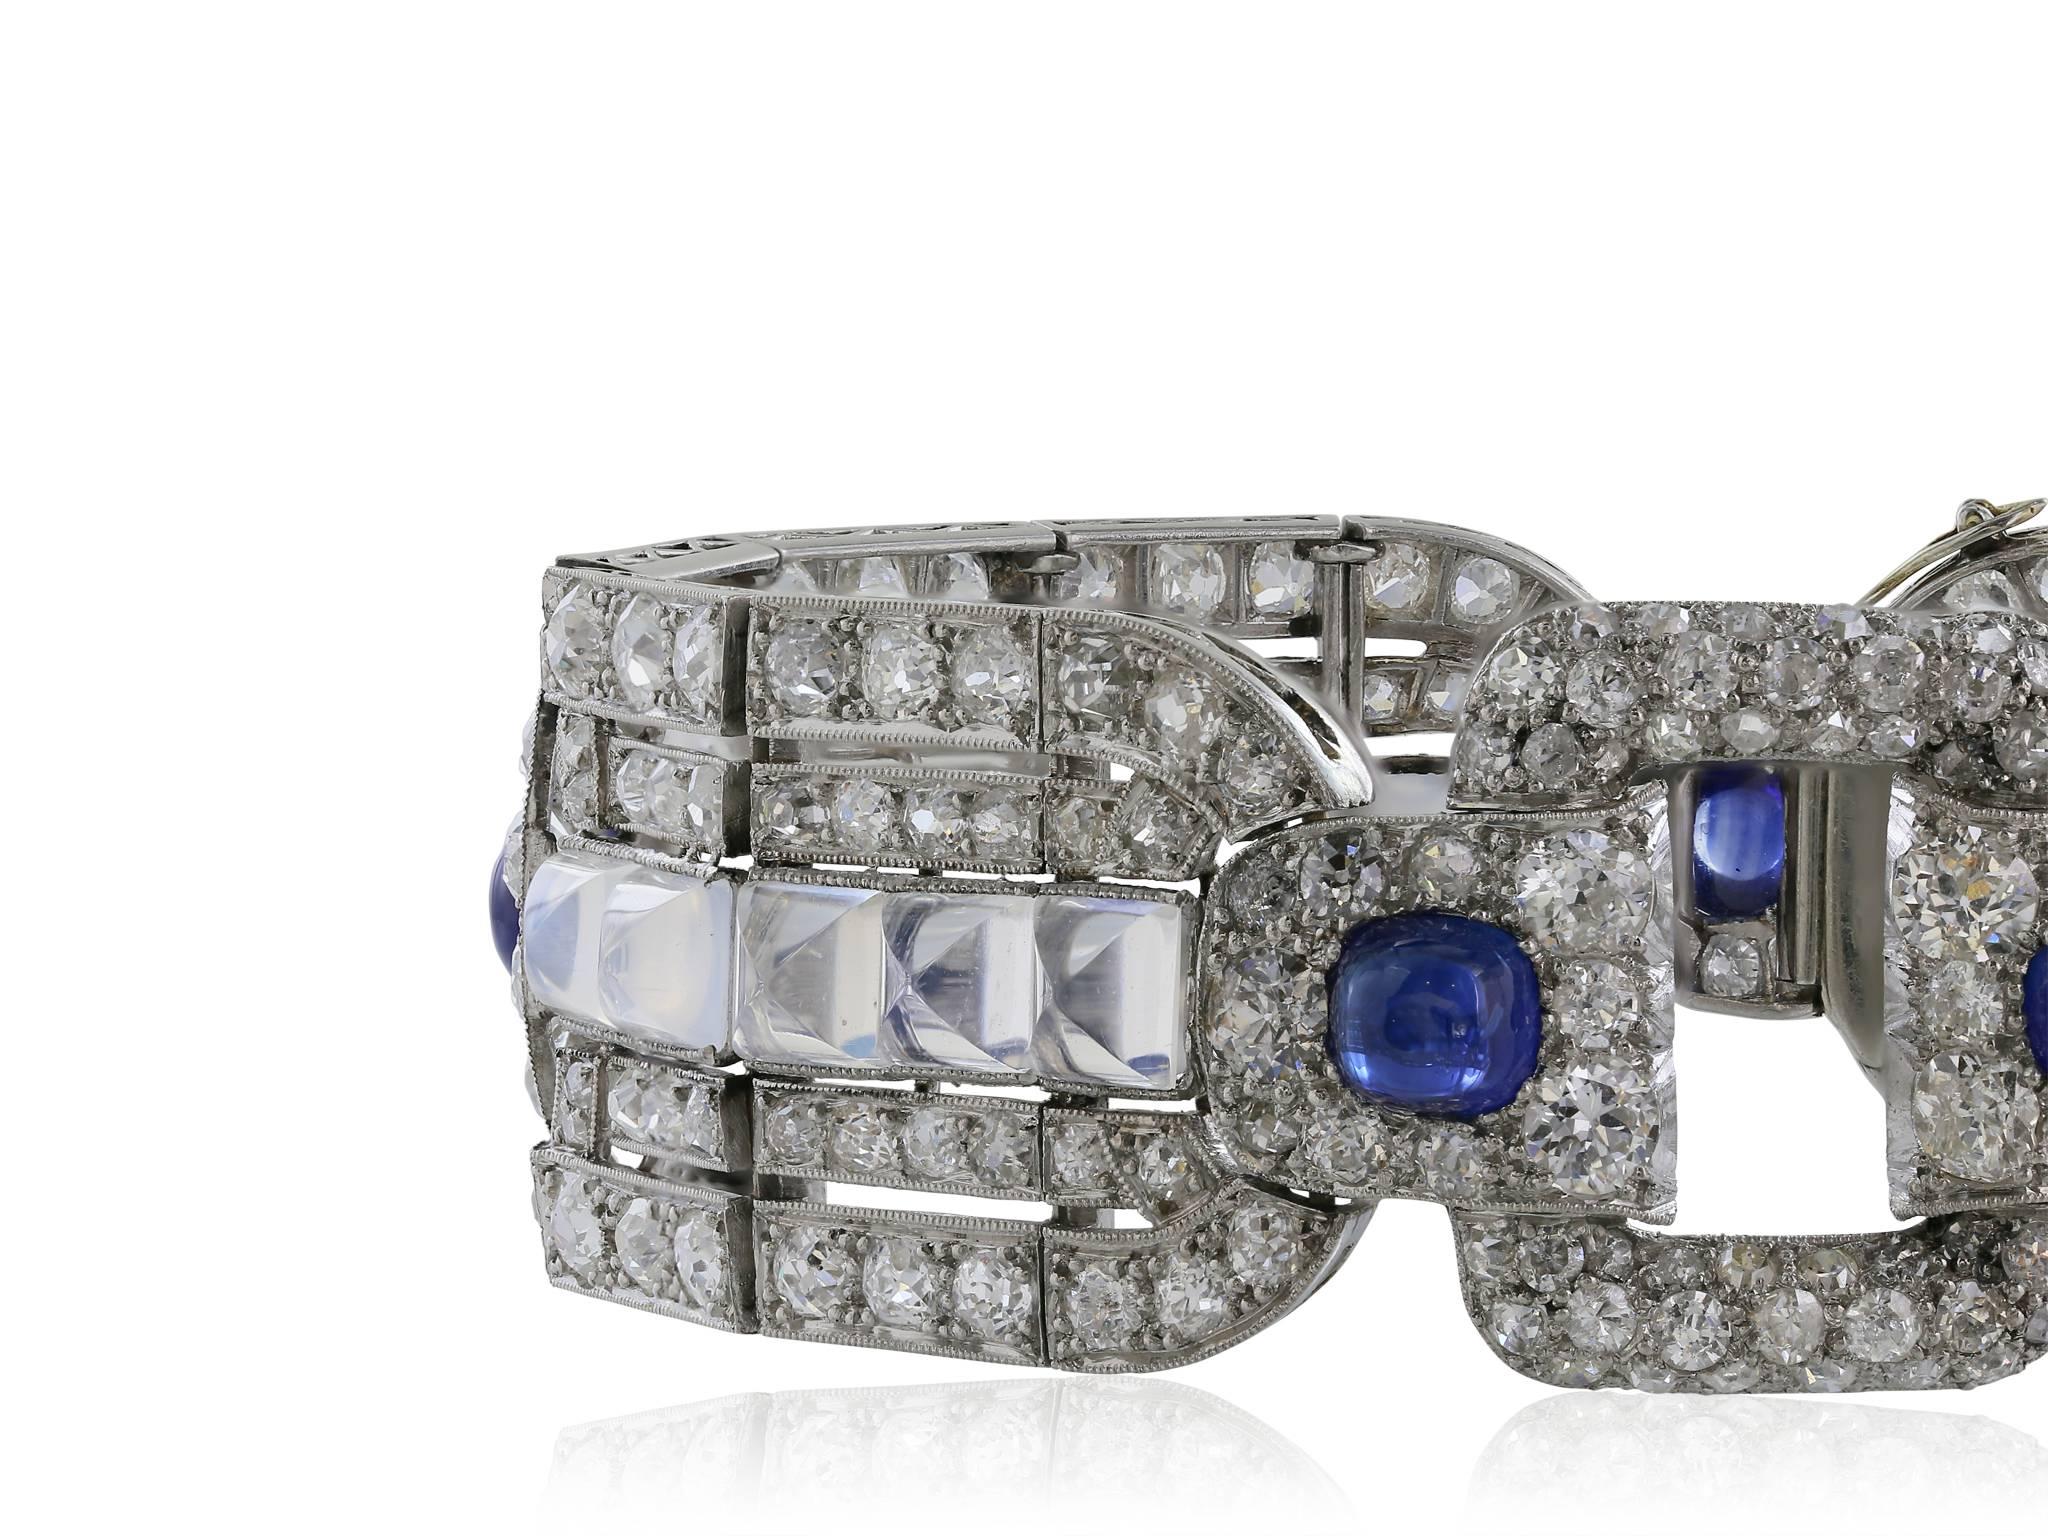 Platinum custom Art Deco bracelet consisting of Old European cut diamonds with an approximate weight of 15 carats set in intricate open work pattern, with 5 cabochon cut sapphires and 20 cabochon cut moonstones.